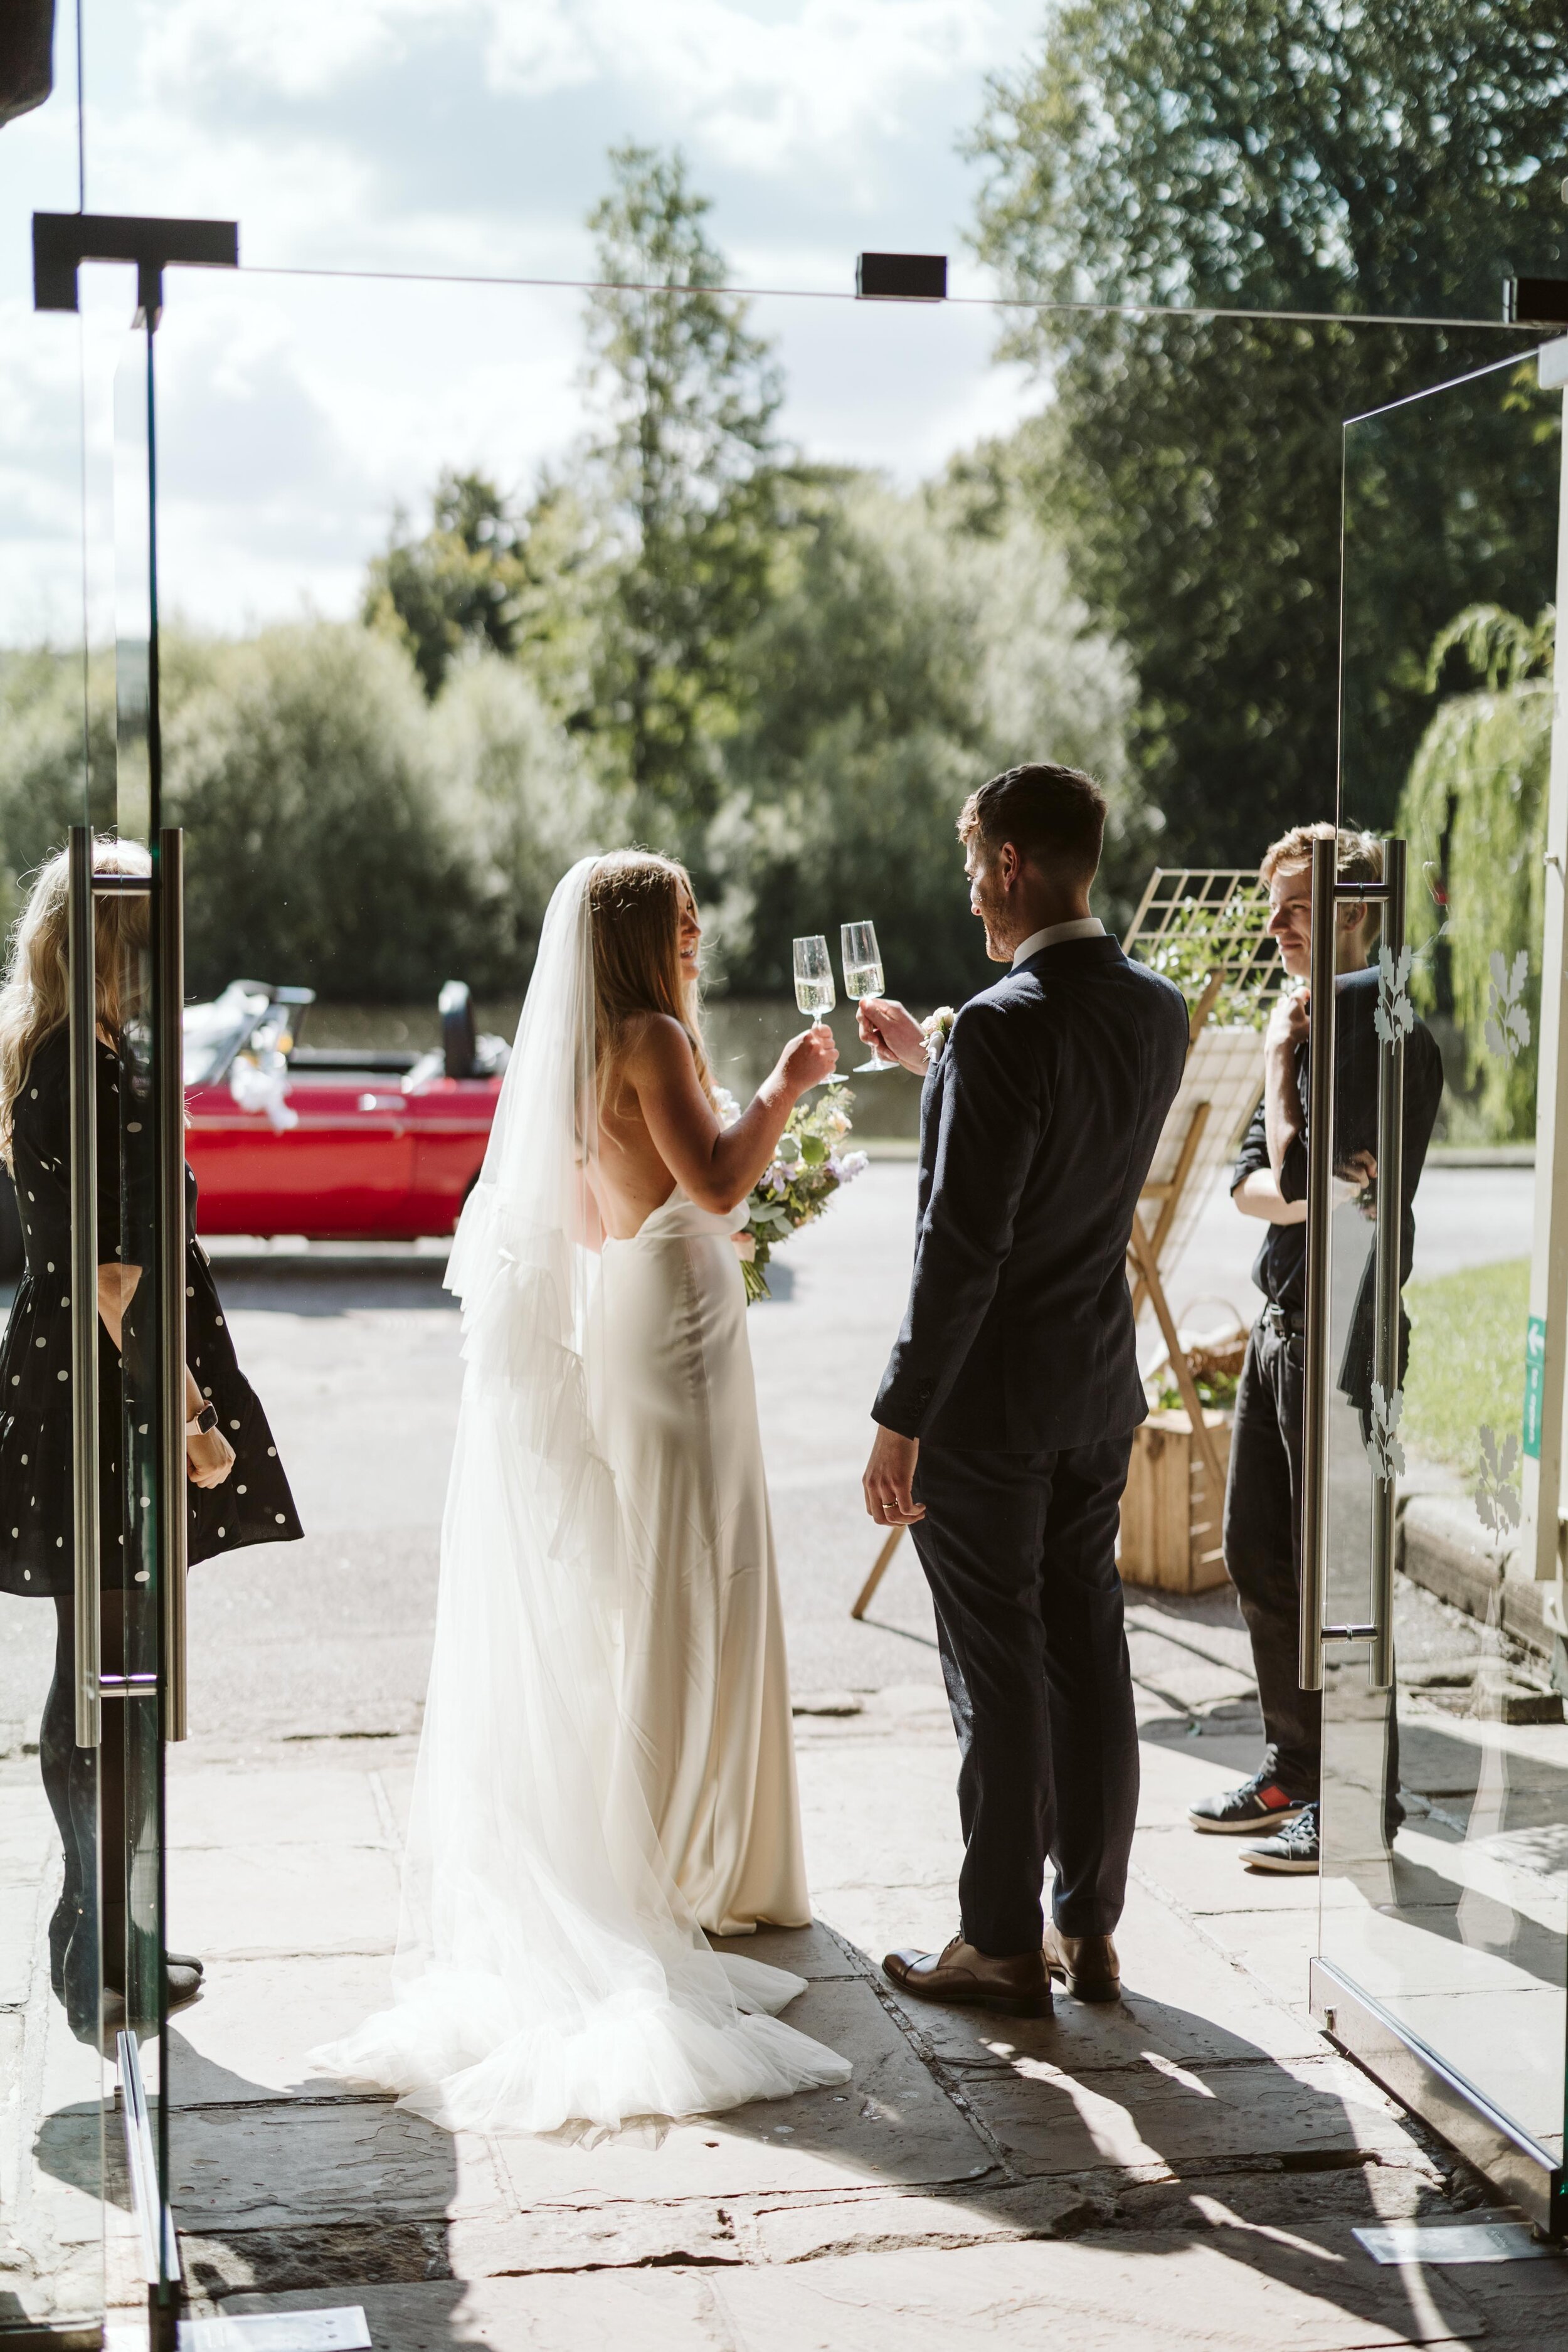 Beautiful bride Katie wore a wedding dress and statement veil by Halfpenny London